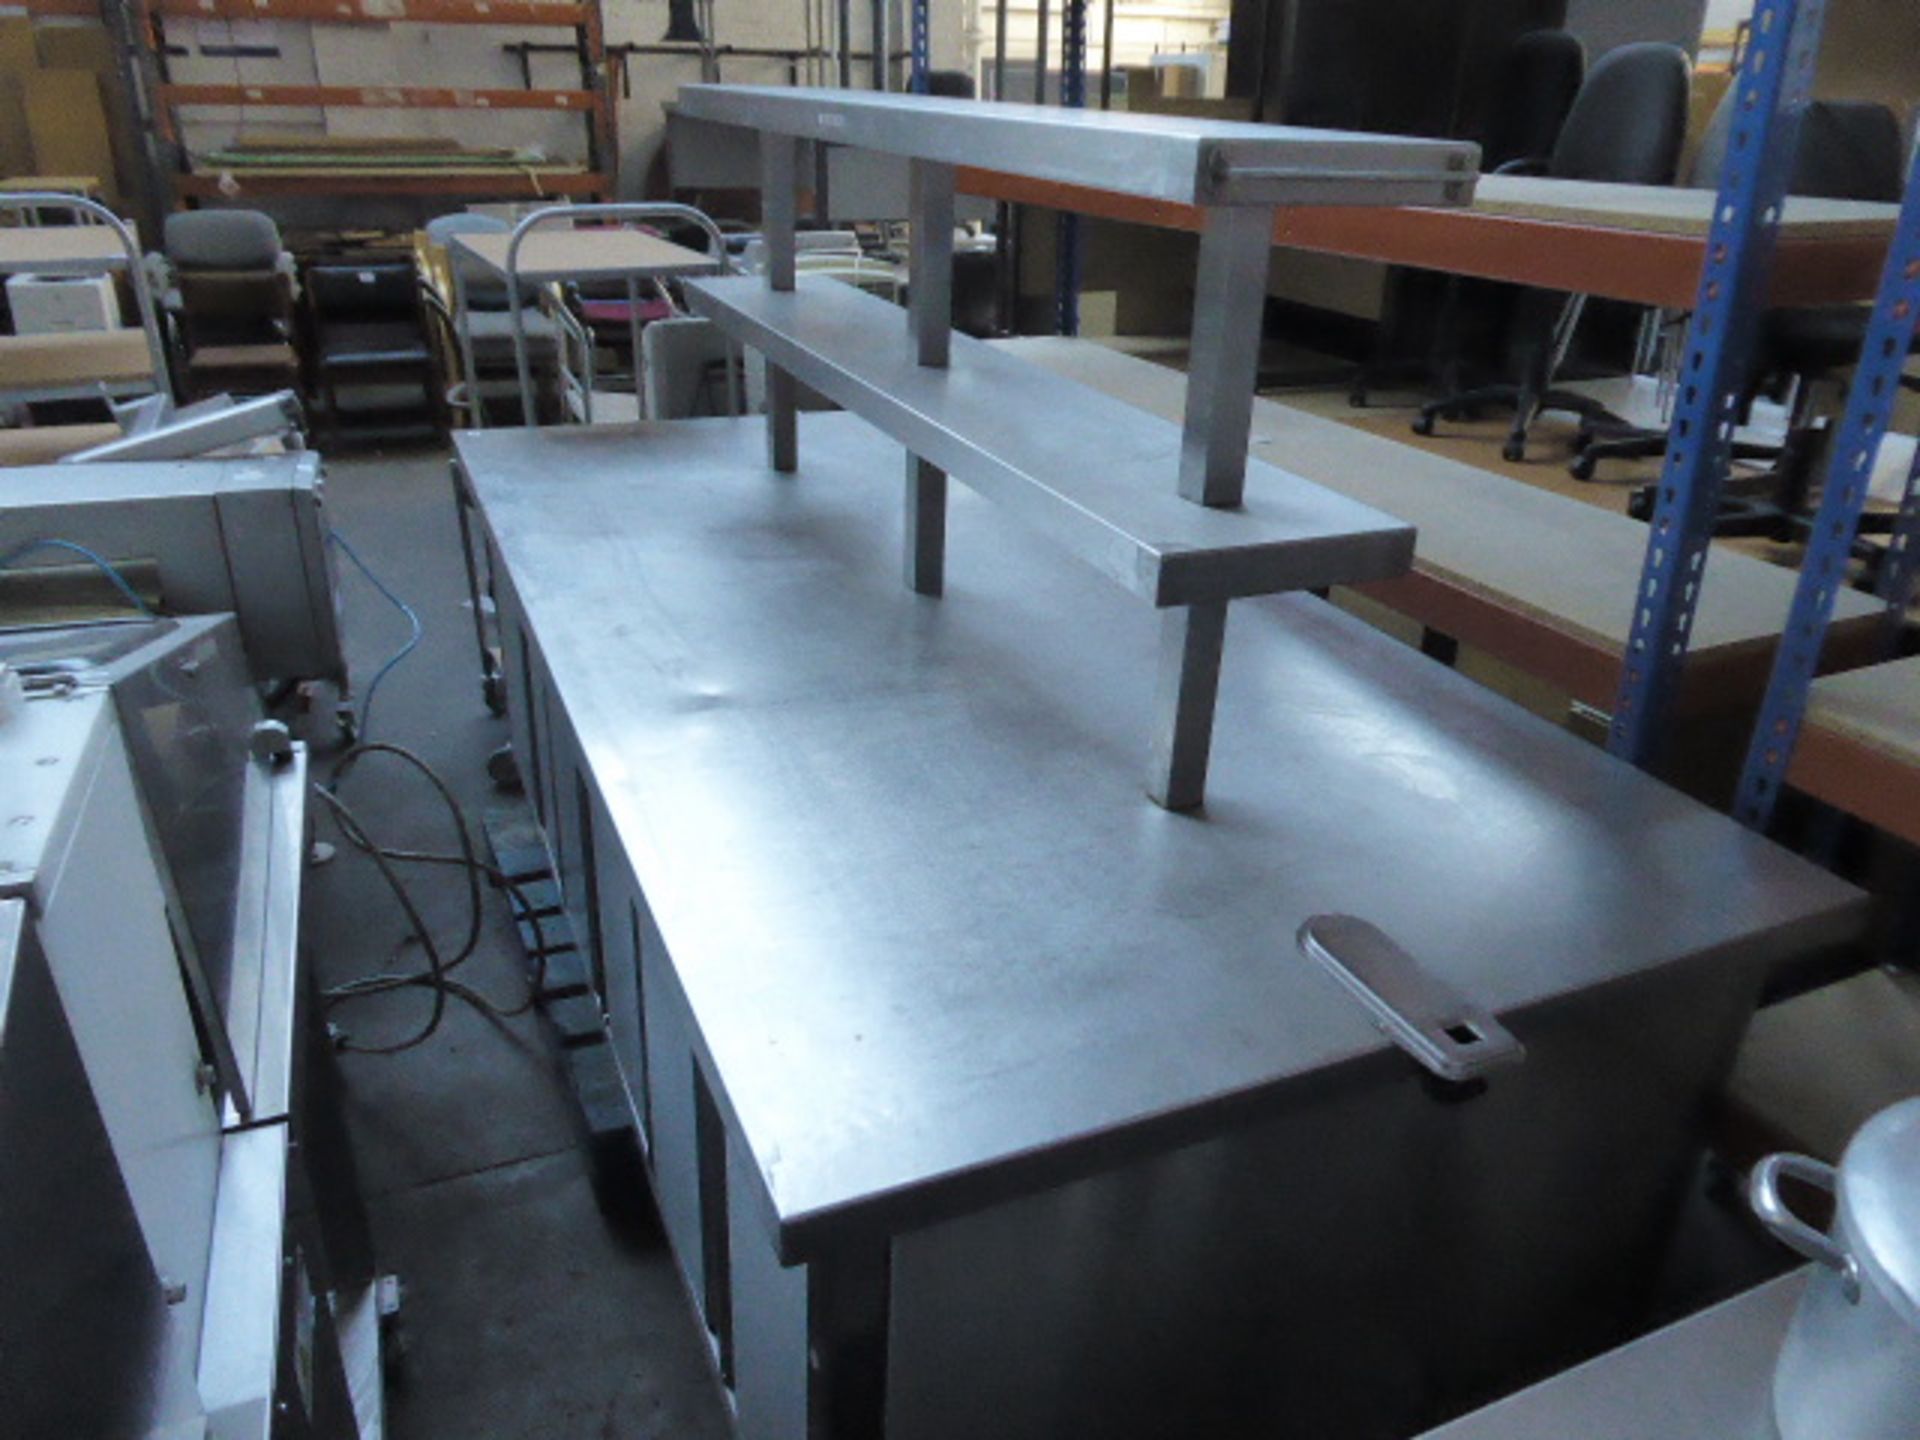 (501) 240cm wide x 120cm deep bespoke built stainless steel island for food preparation with 2